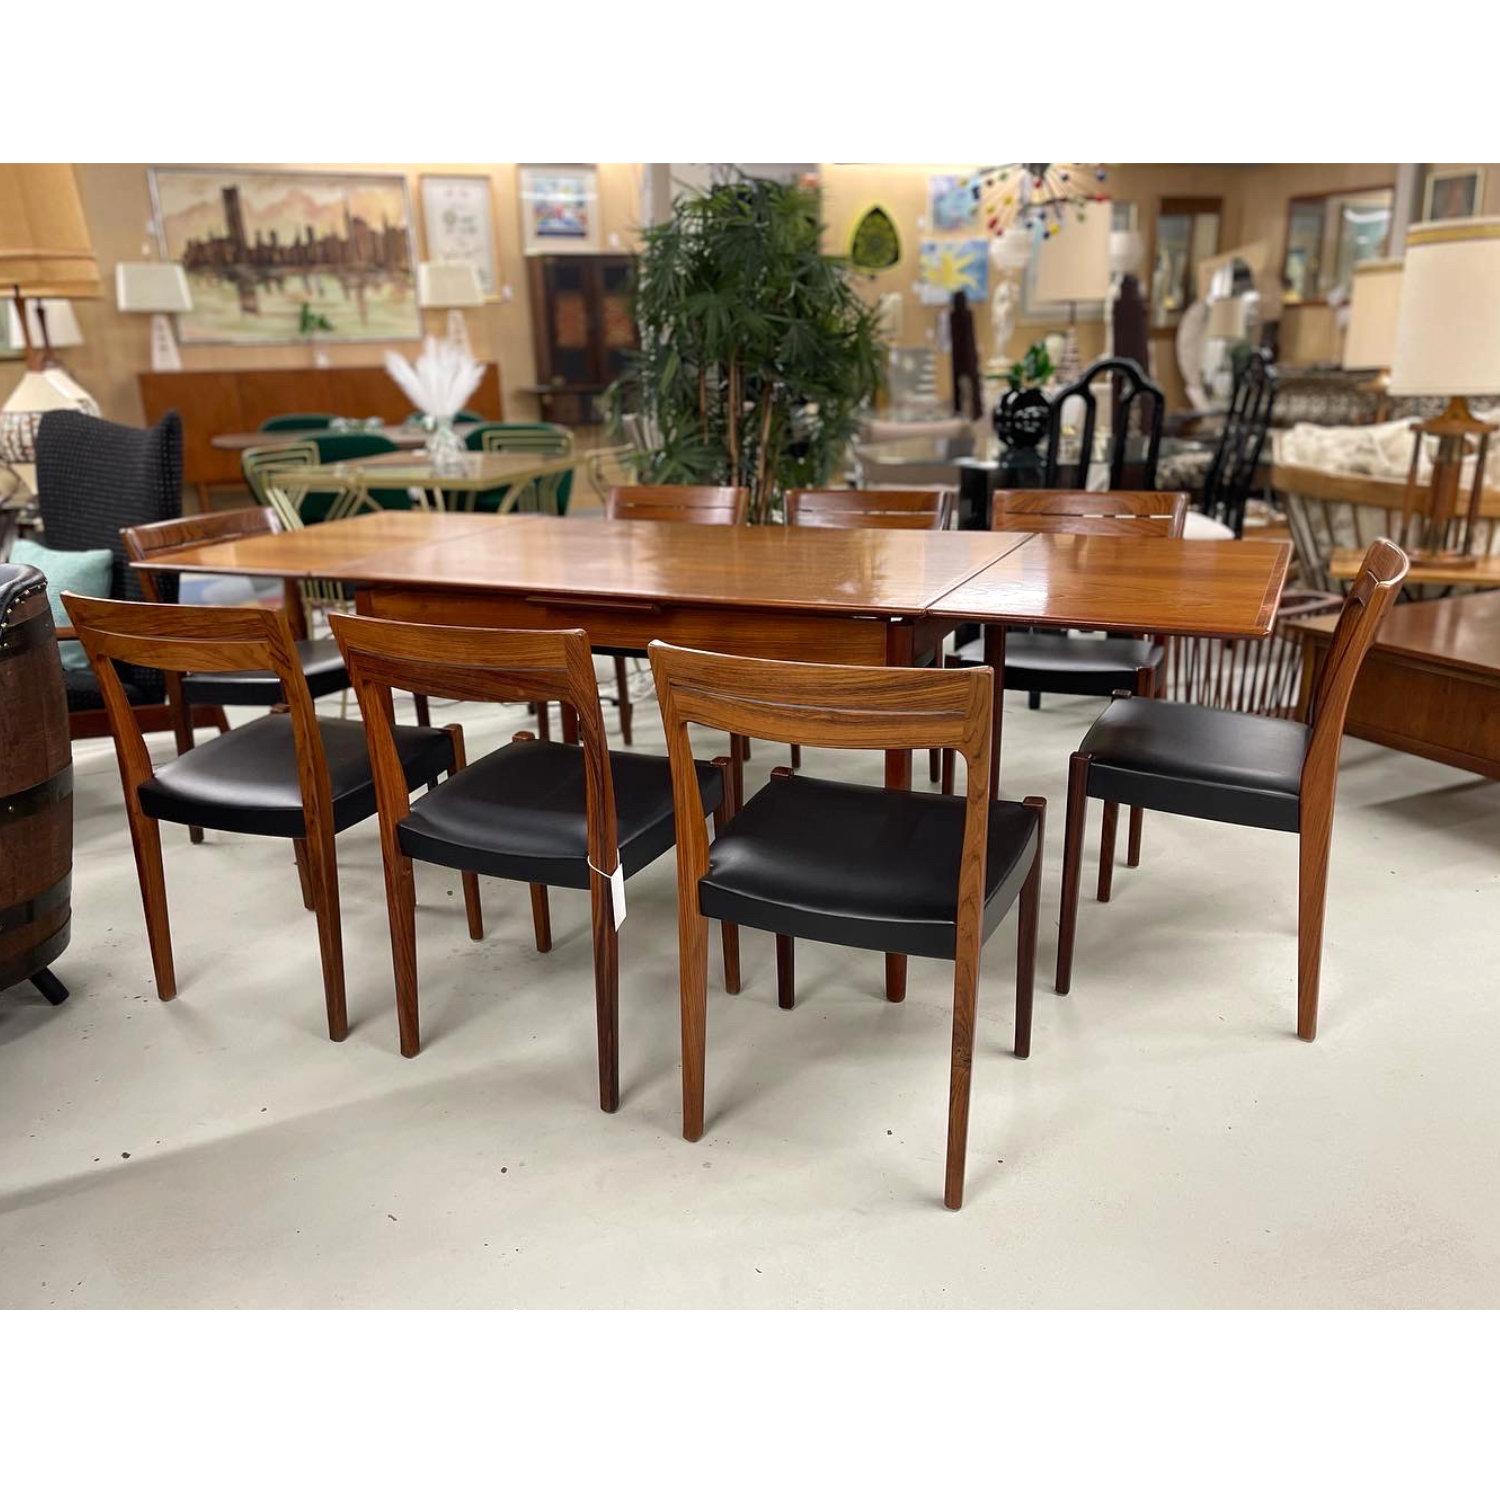 Set of 8 Svegards Markaryd rosewood dining chairs made in Sweden. The vintage Danish Modern style dining chairs were actually born and bred in neighboring Sweden. Craftsmanship is second to none and our restoration team did a knock out job on the